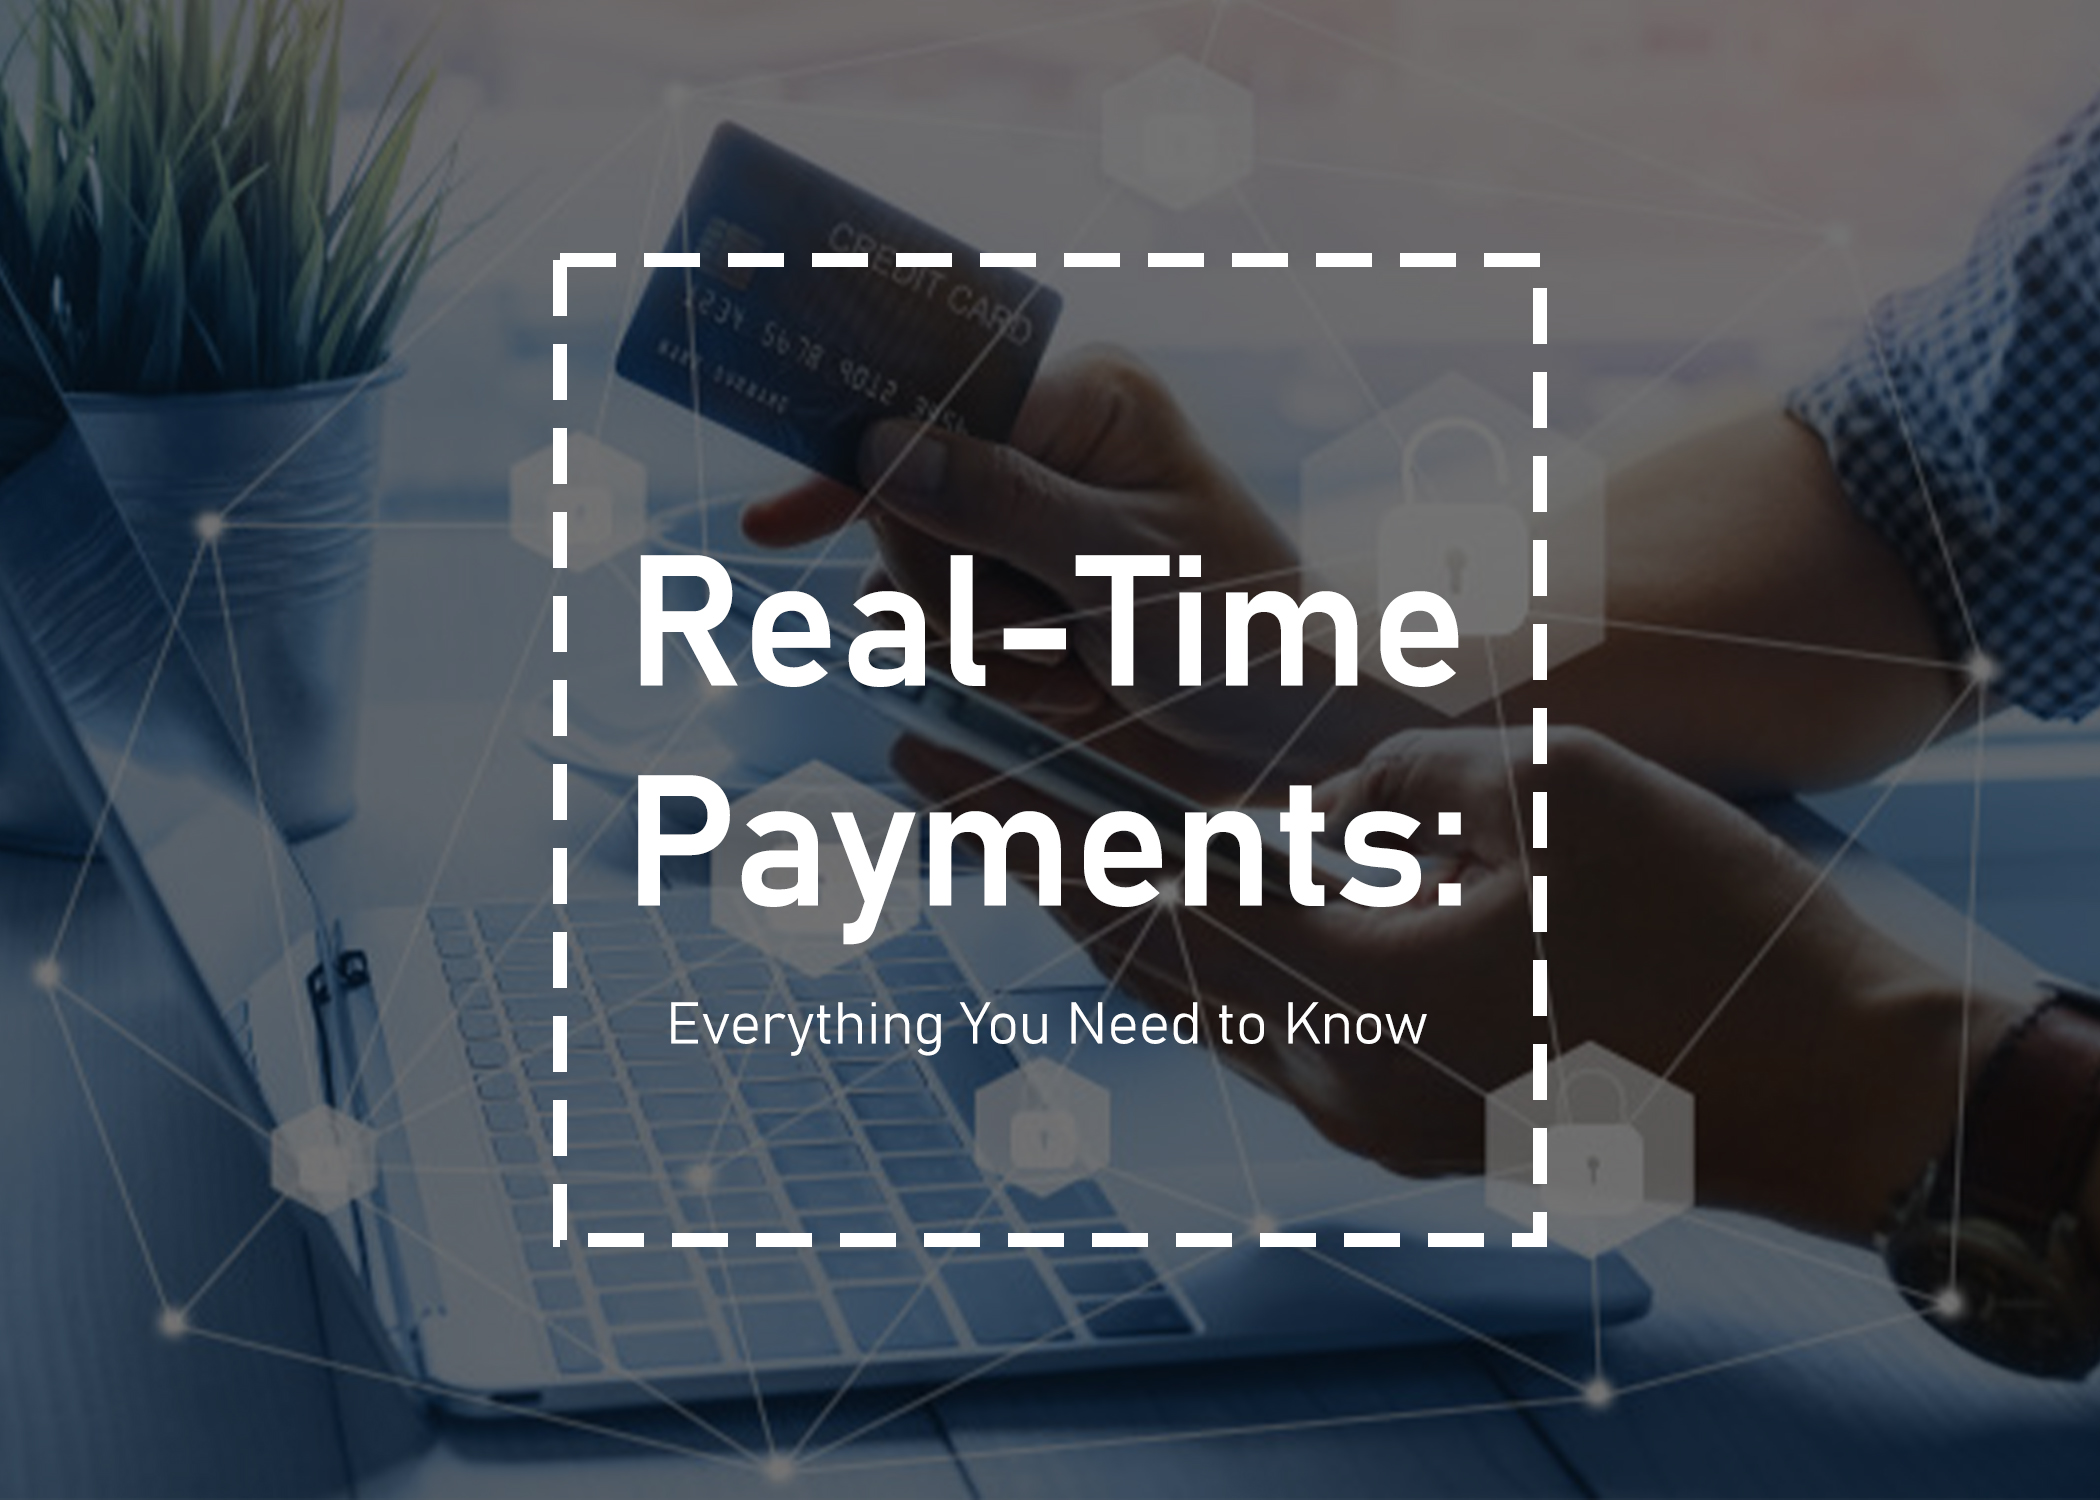 real-time-payments-everything-you-need-to-know-paymentsjournal